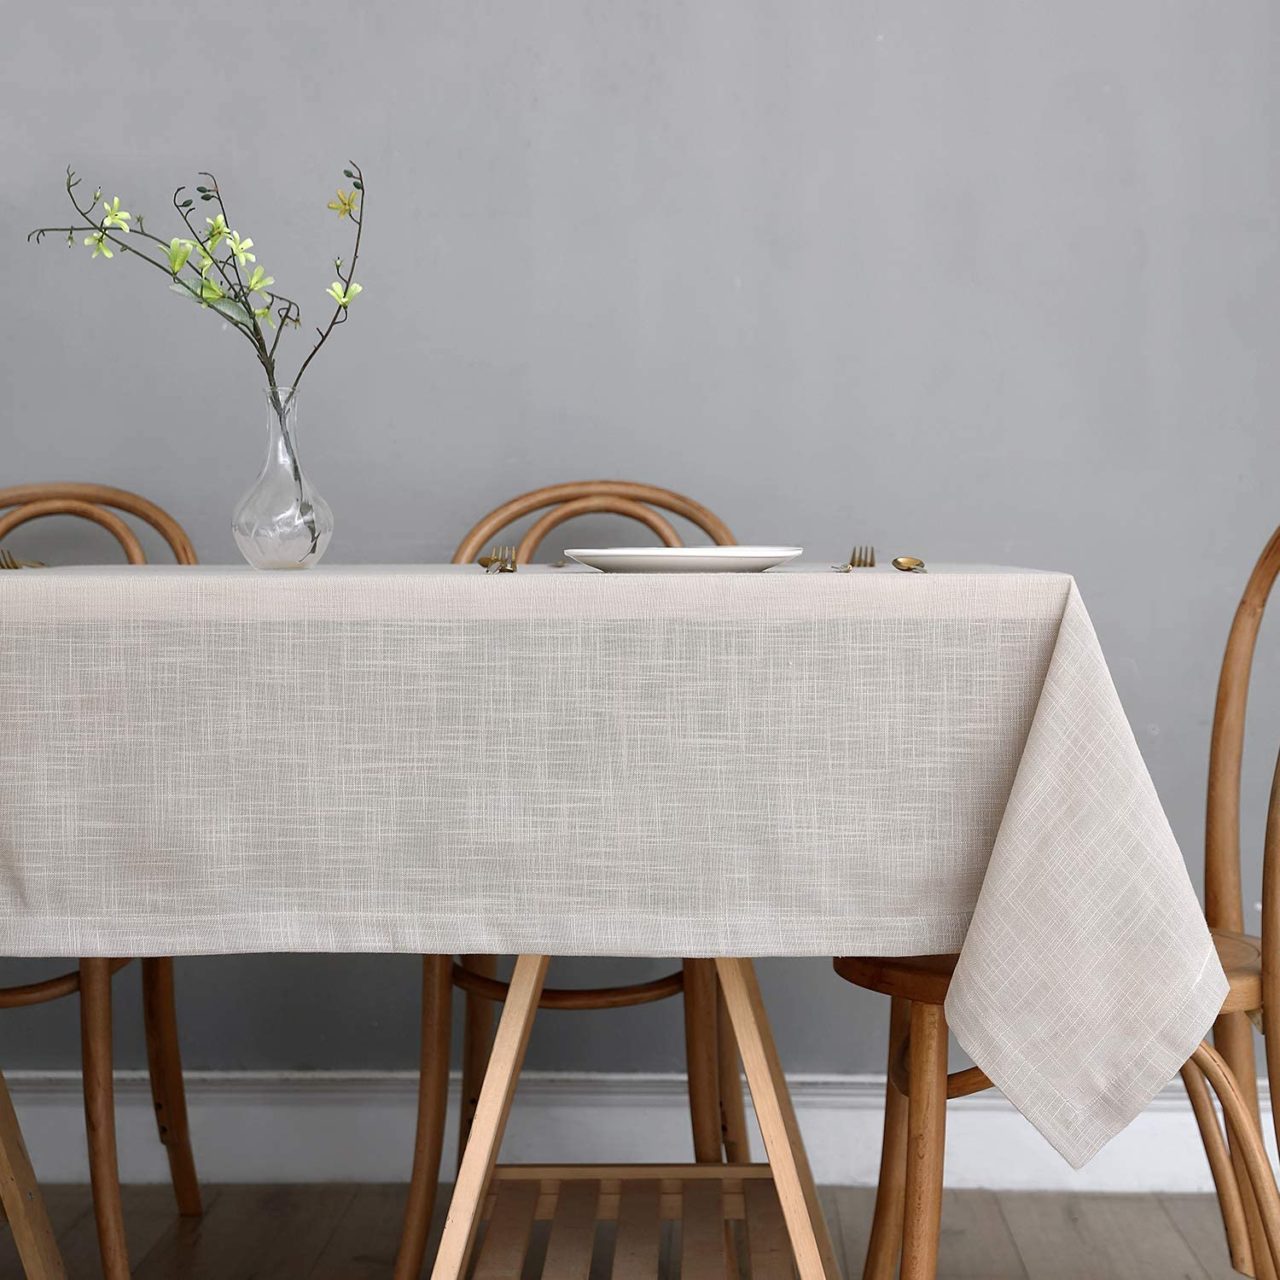 Dining table with neutral colored linen for backyard wedding